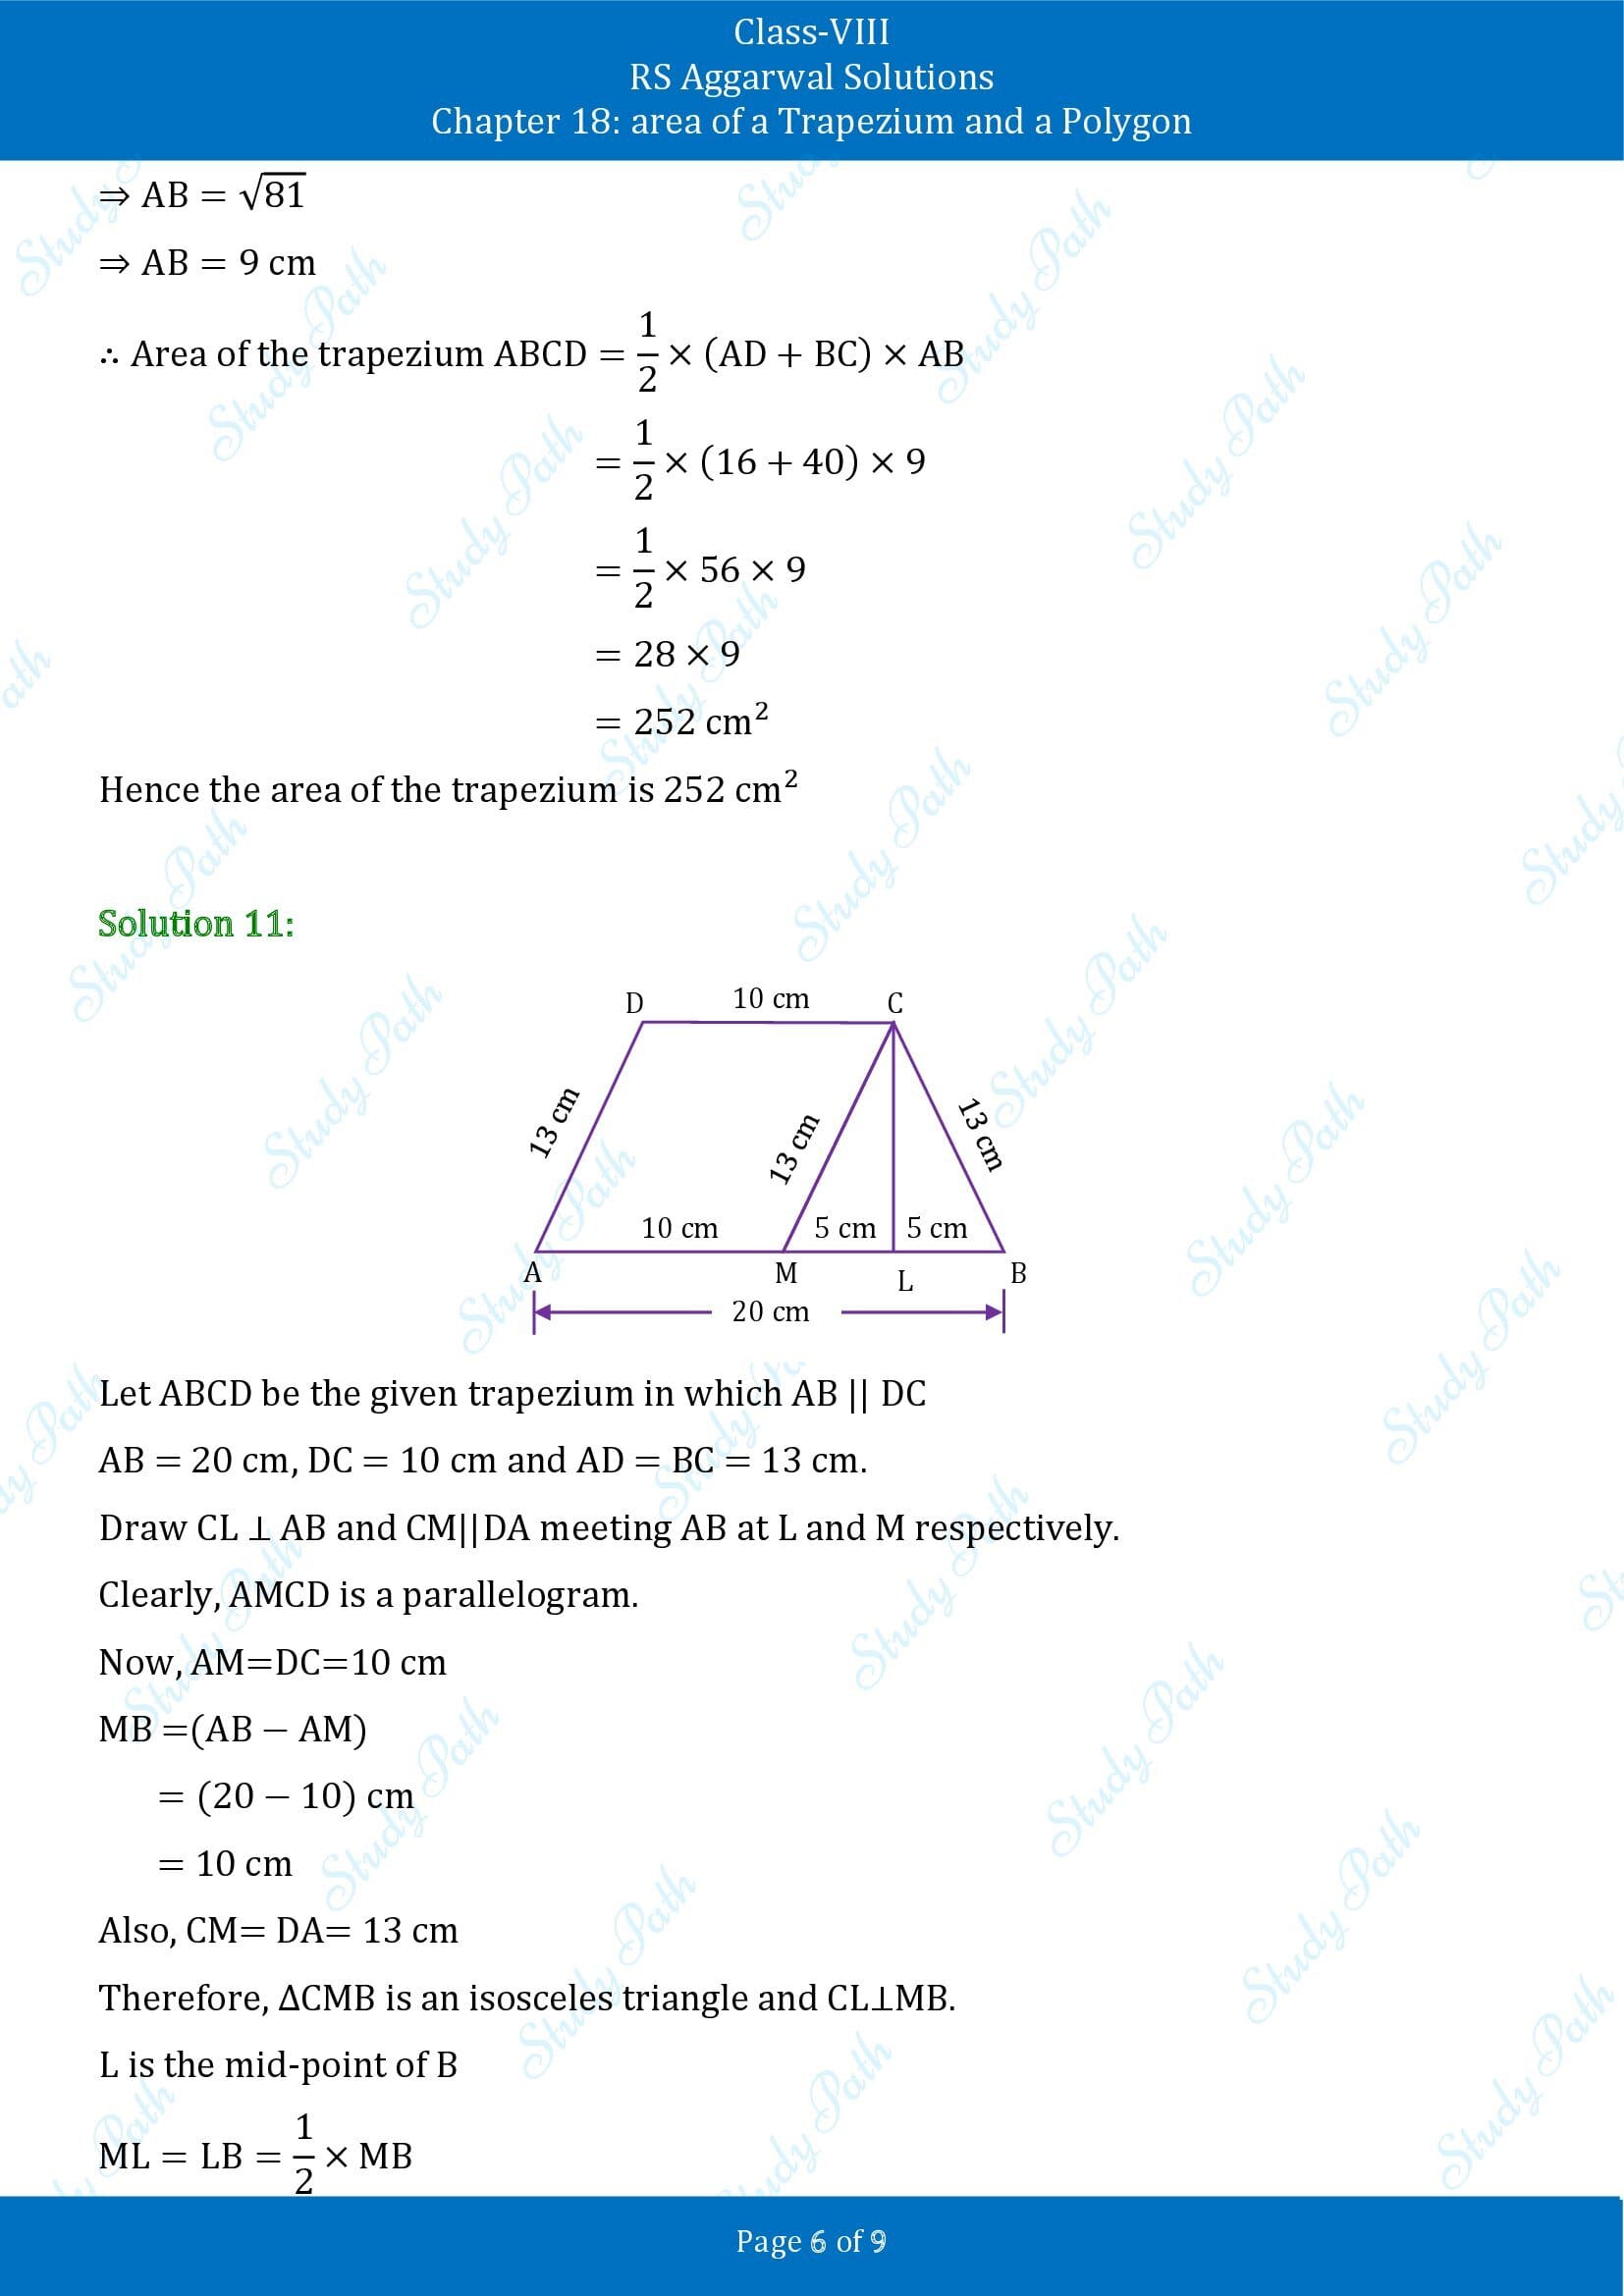 RS Aggarwal Solutions Class 8 Chapter 18 Area of a Trapezium and a Polygon Exercise 18A 00006